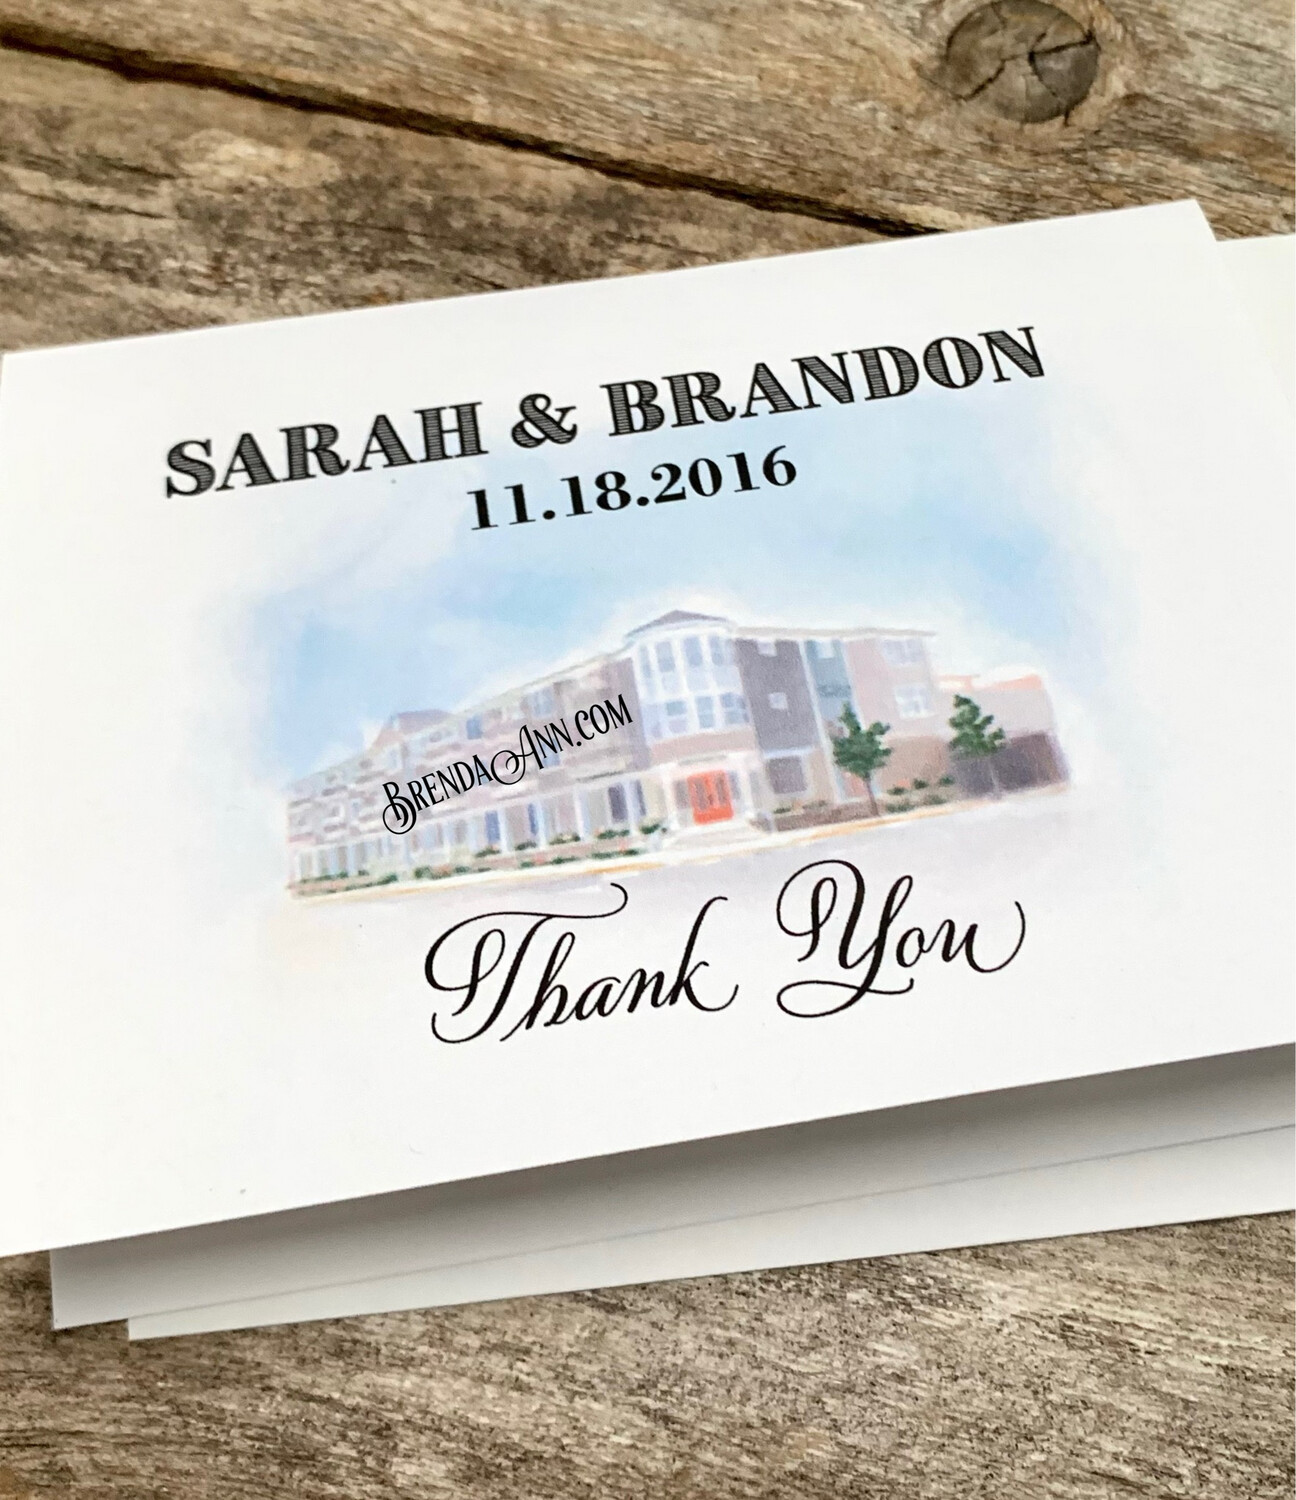 Wedding Thank You Cards - The Reeds at Shelter Haven Stone Harbor NJ